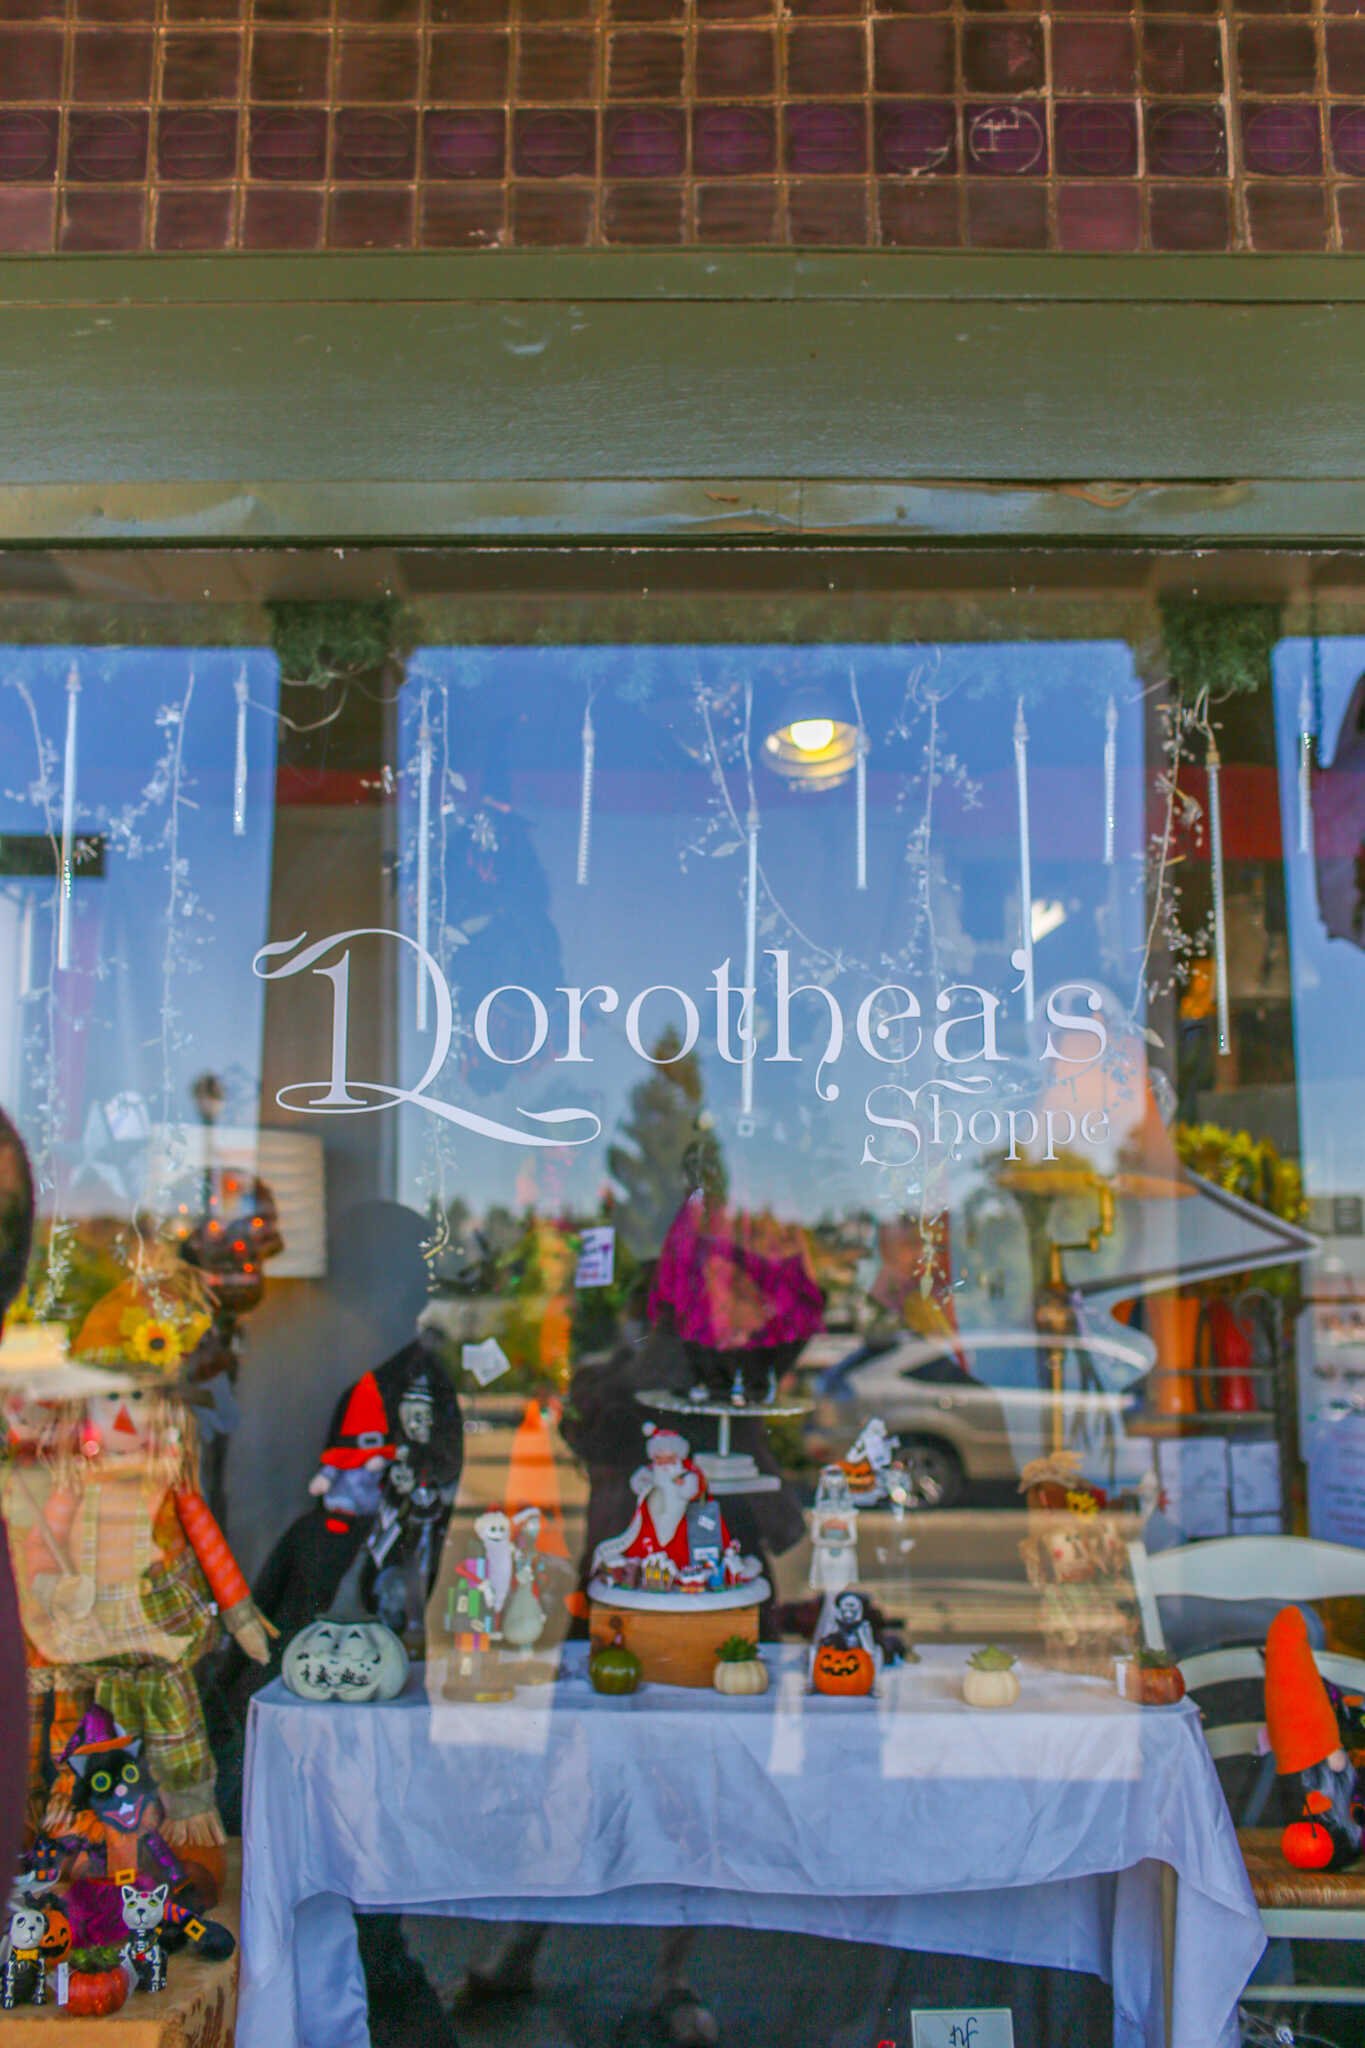 Family Travel Guide to Folsom California - Dorothea’s Christmas Shoppe storefront on Sutter Street in the Folsom Historic District.